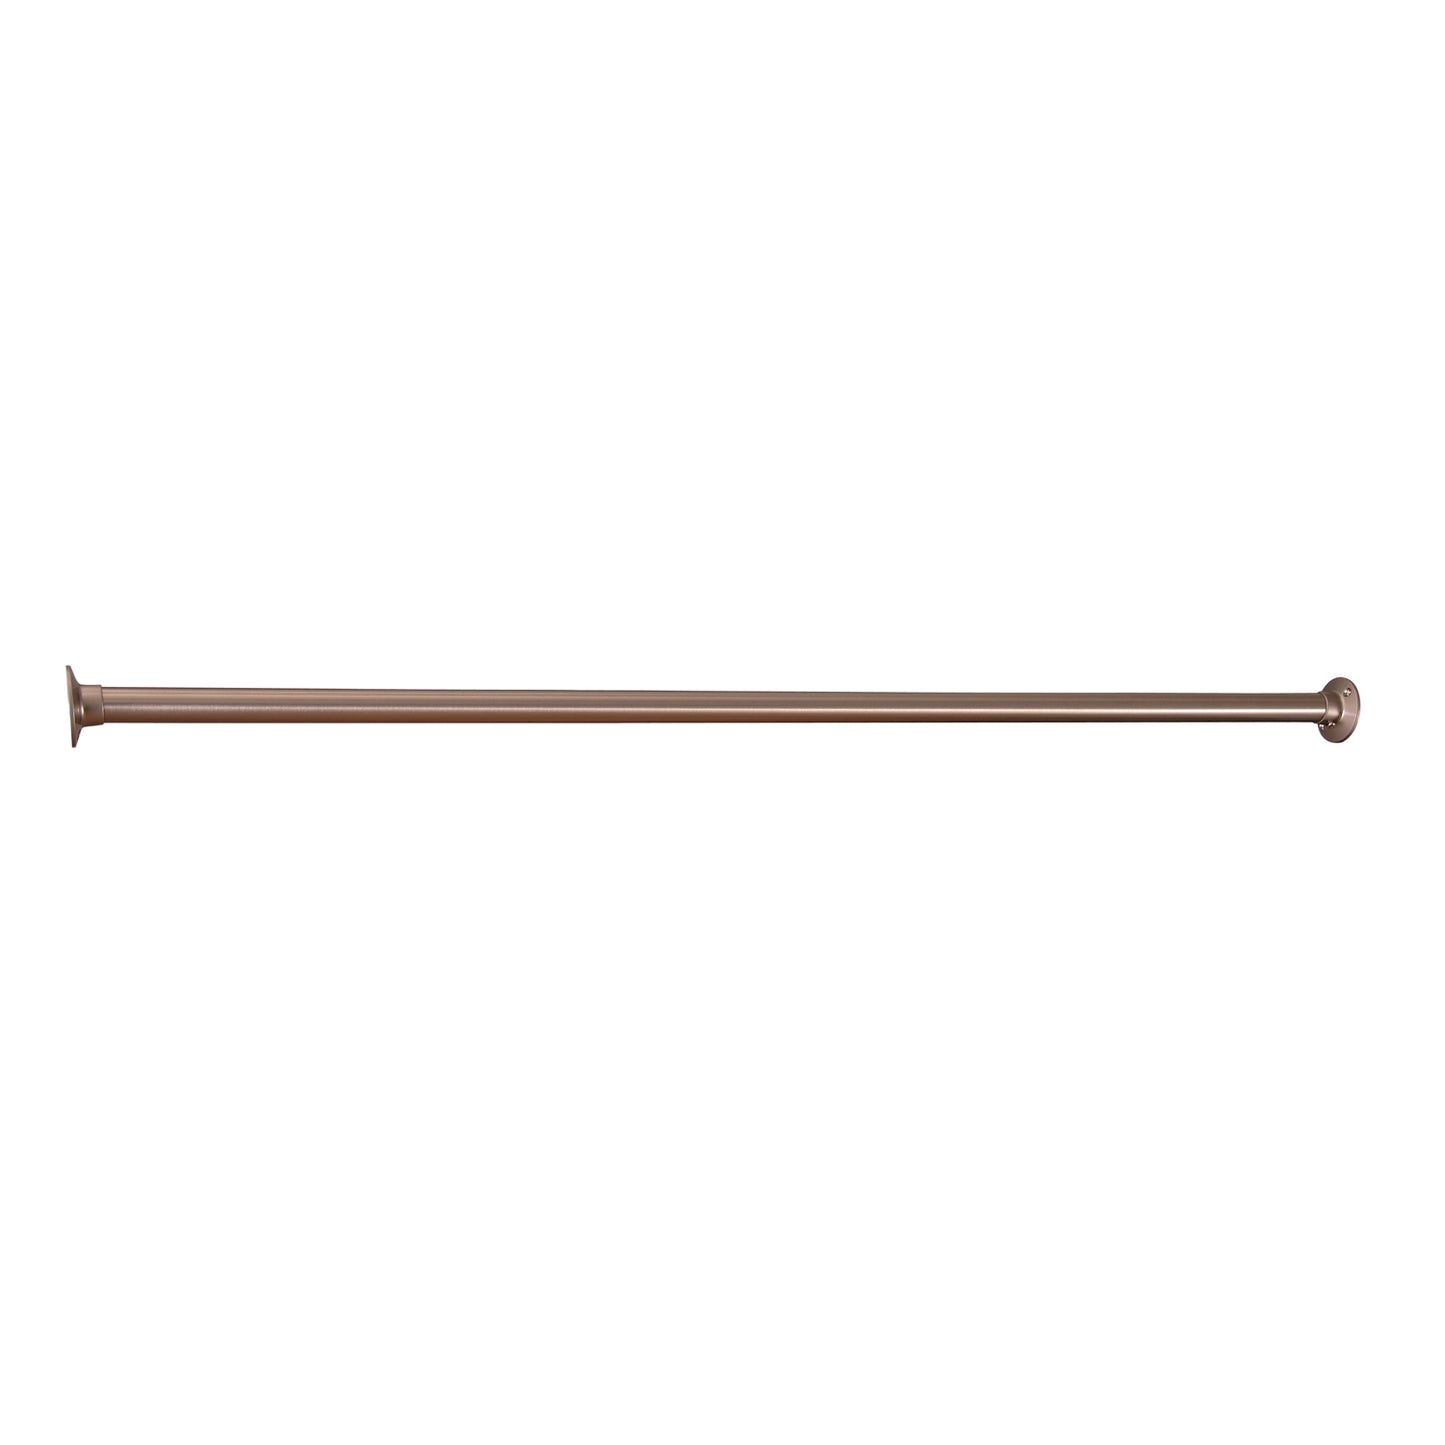 60" Straight Shower Rod in Brushed Nickel